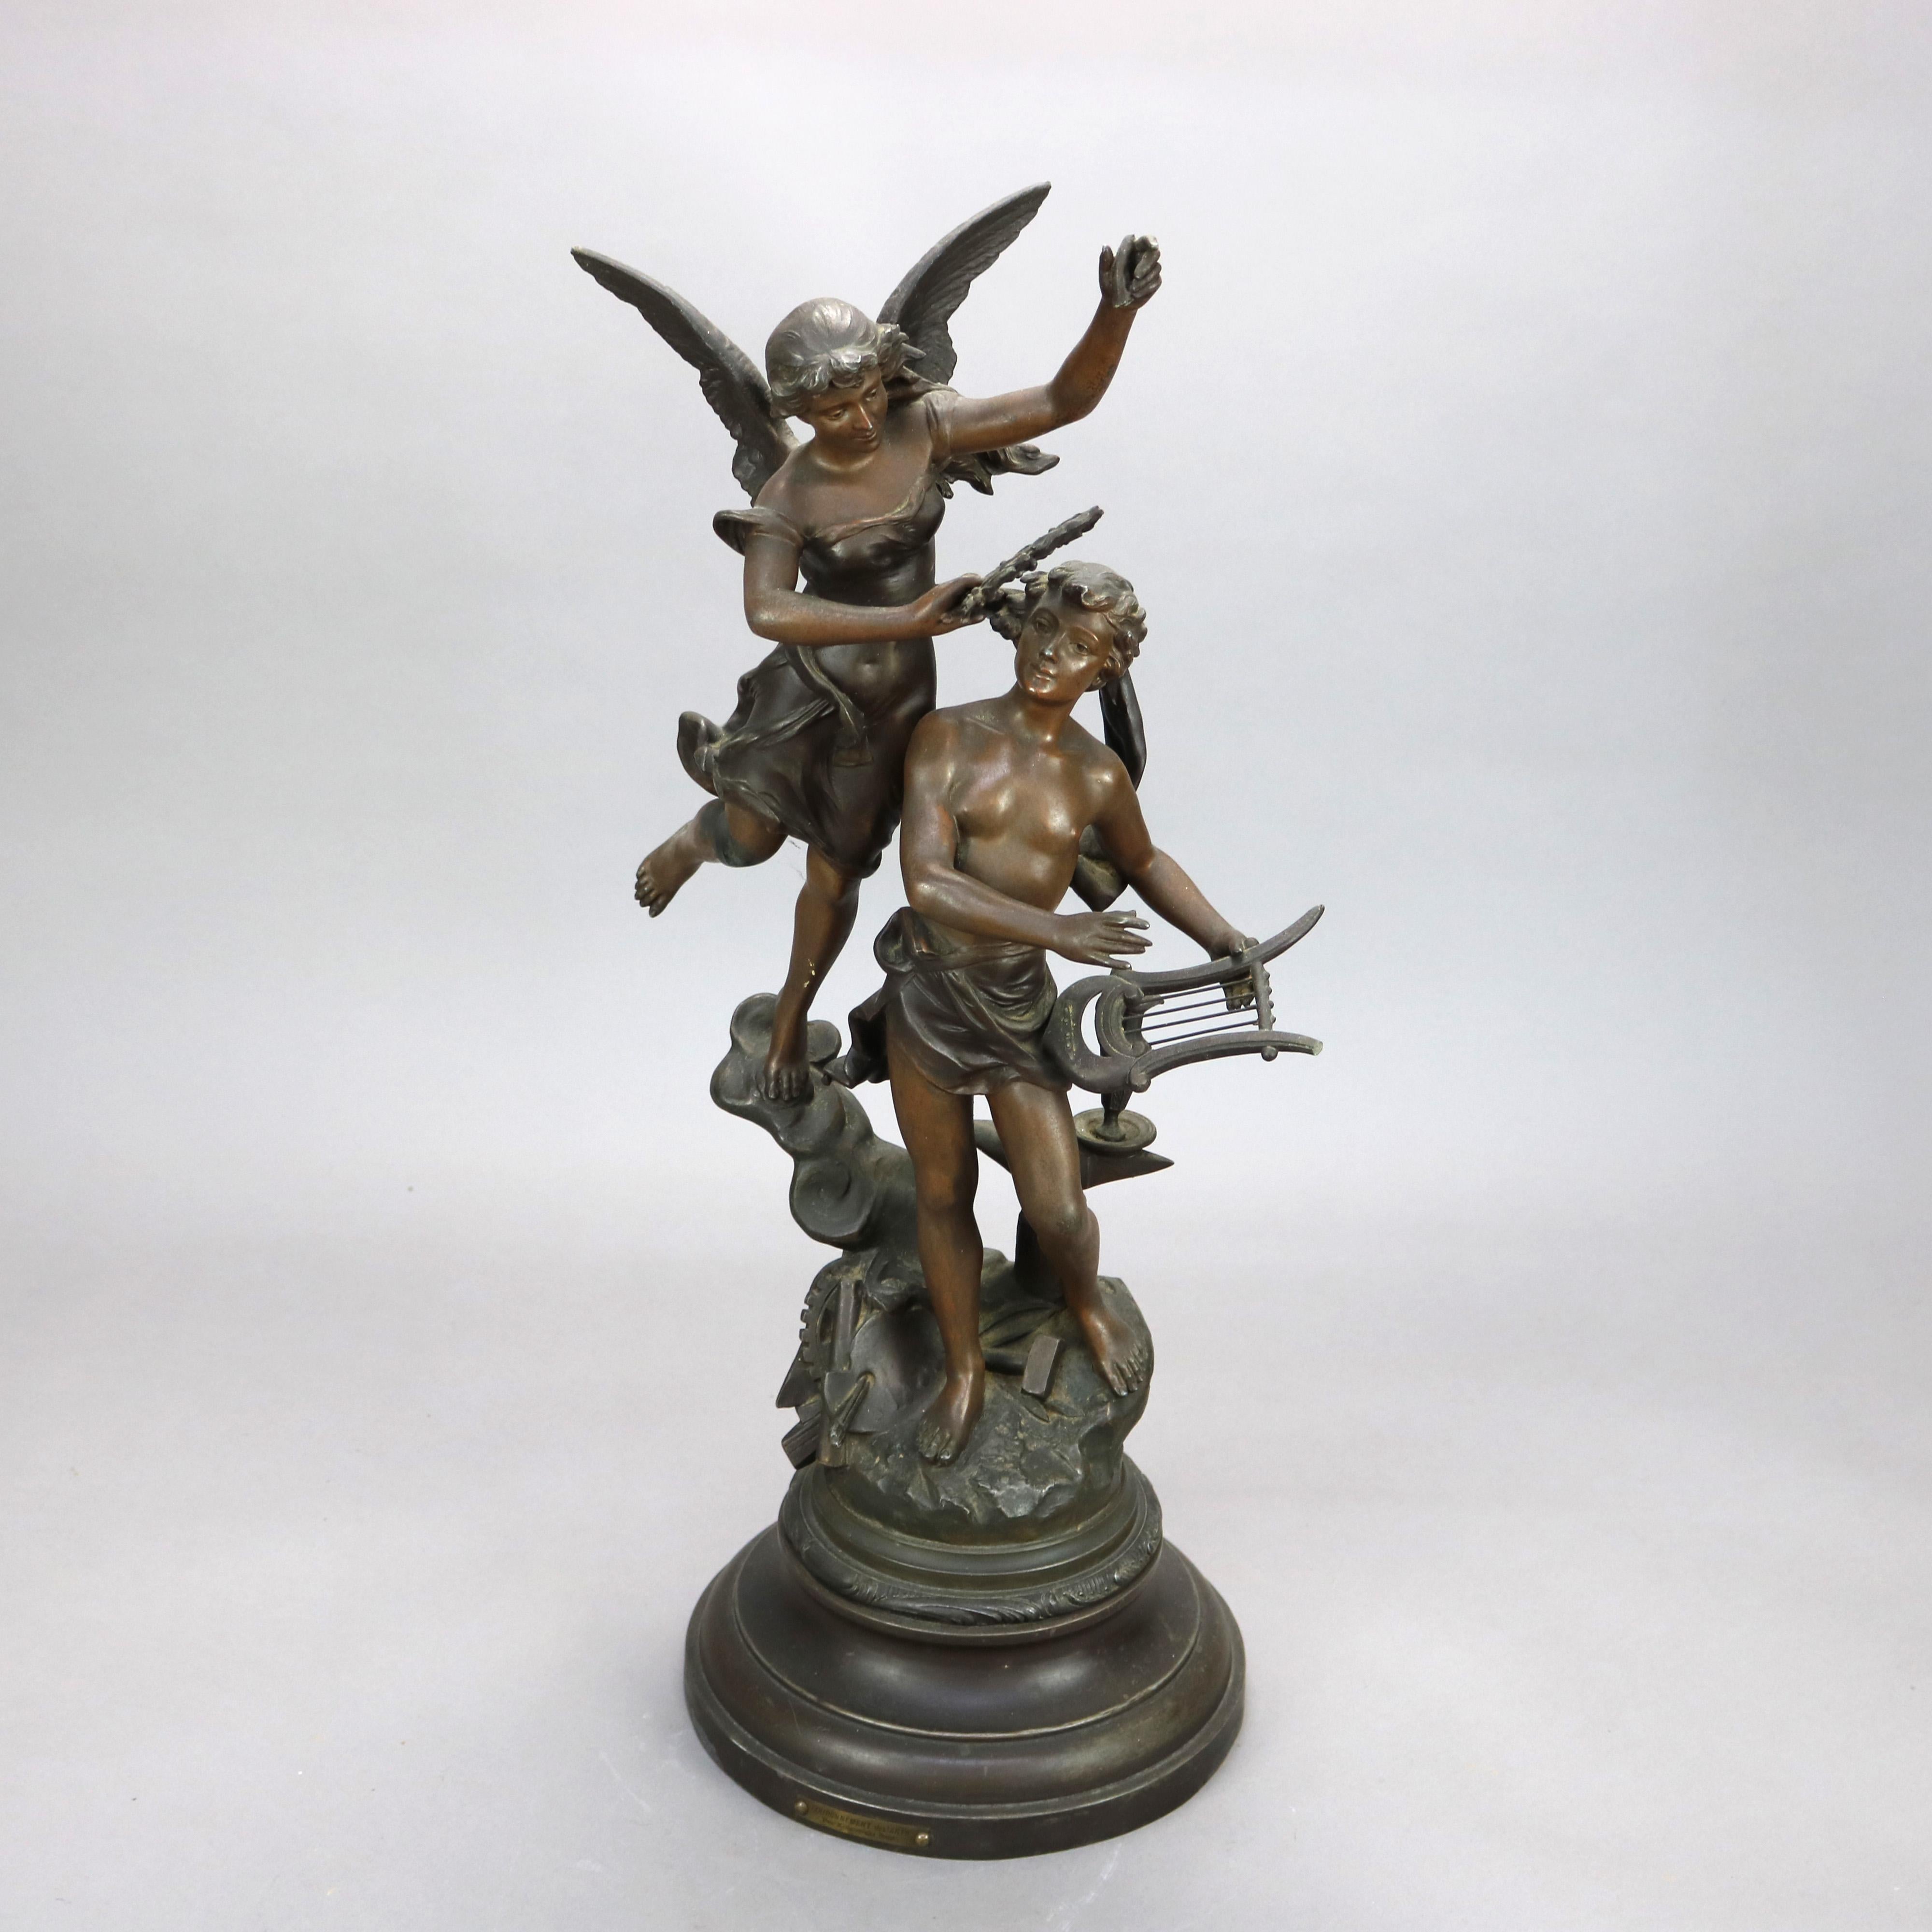 An antique French Henryk Kossowski (1855-1921) bronzed cast spelter sculpture titled “Couronnement des Arts” (Coronation of Art) depicts Neoclassical angel placing a crown wreath on the head of young man surrounded by elements of the arts, Kossowski